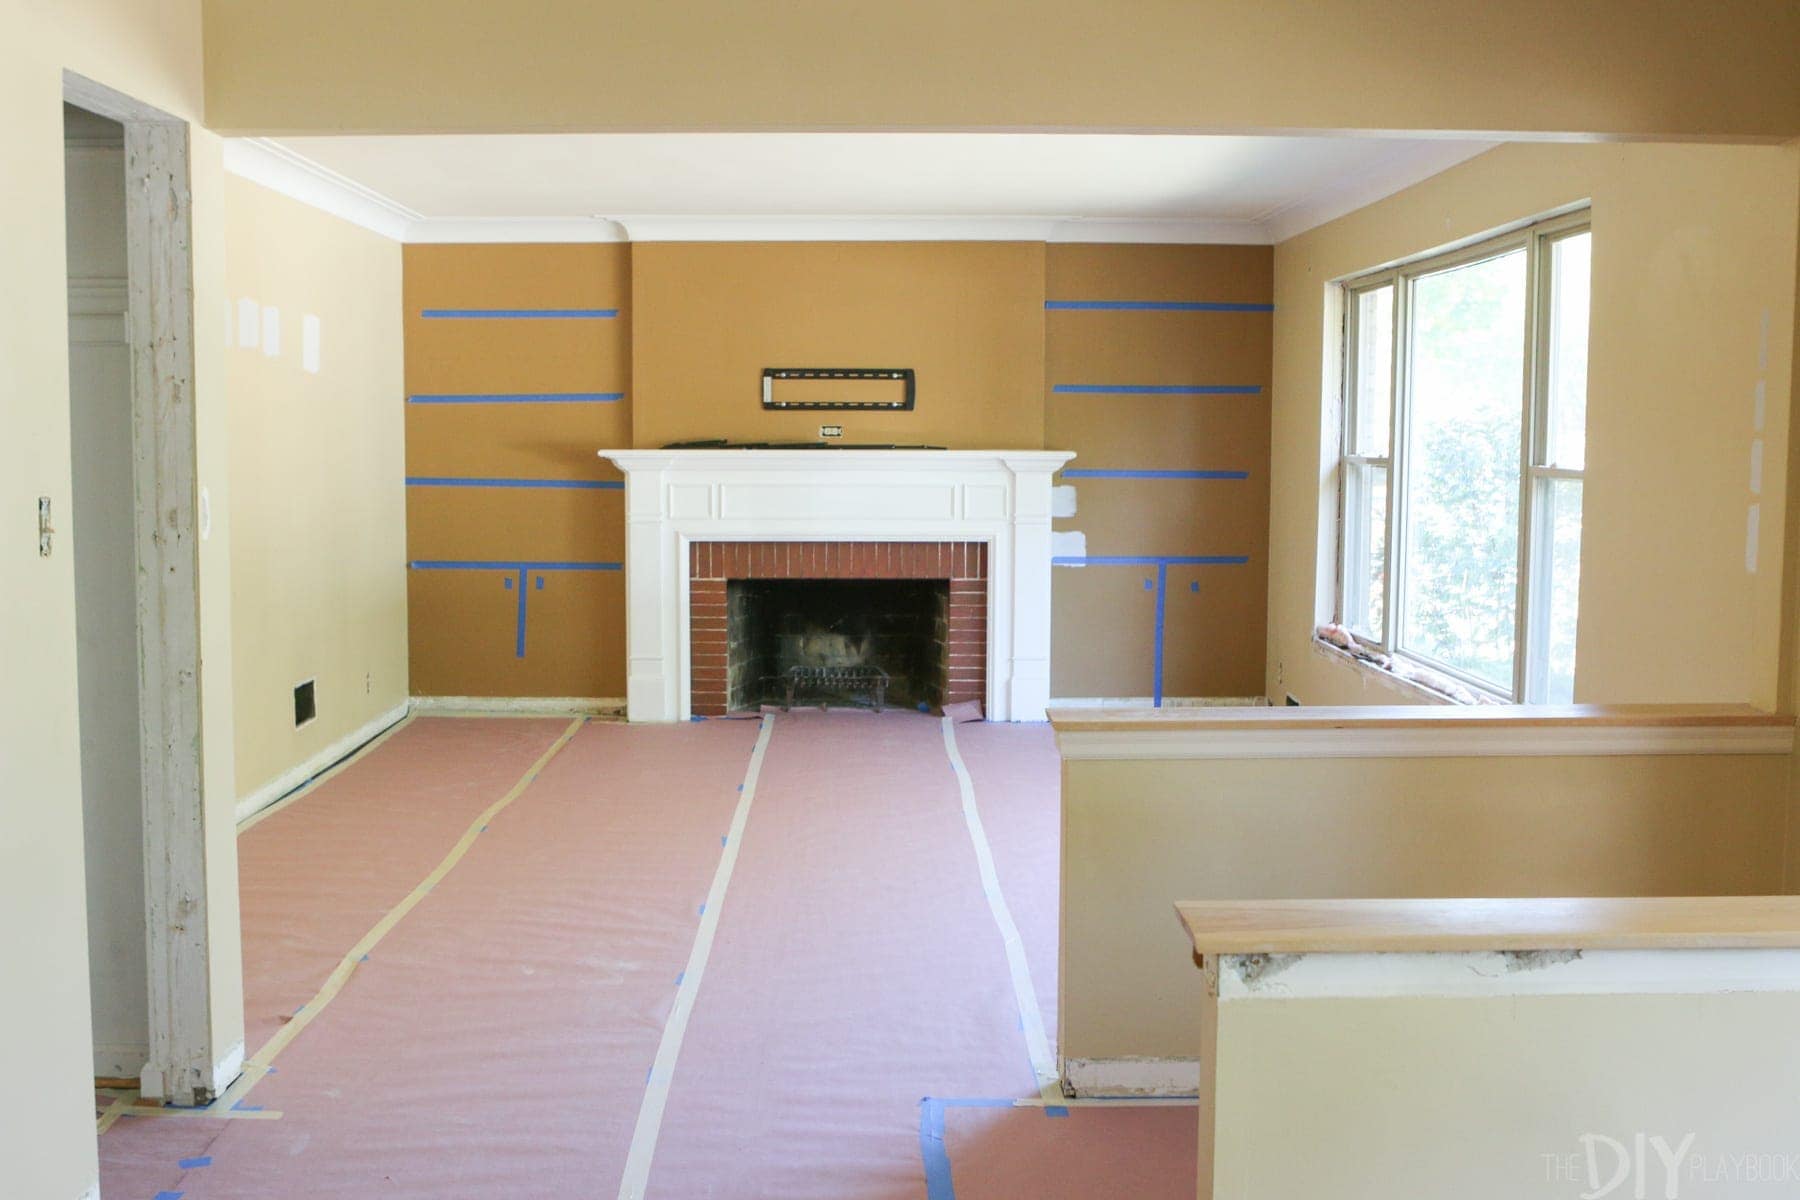 Whte Built-Ins Around a Fireplace before